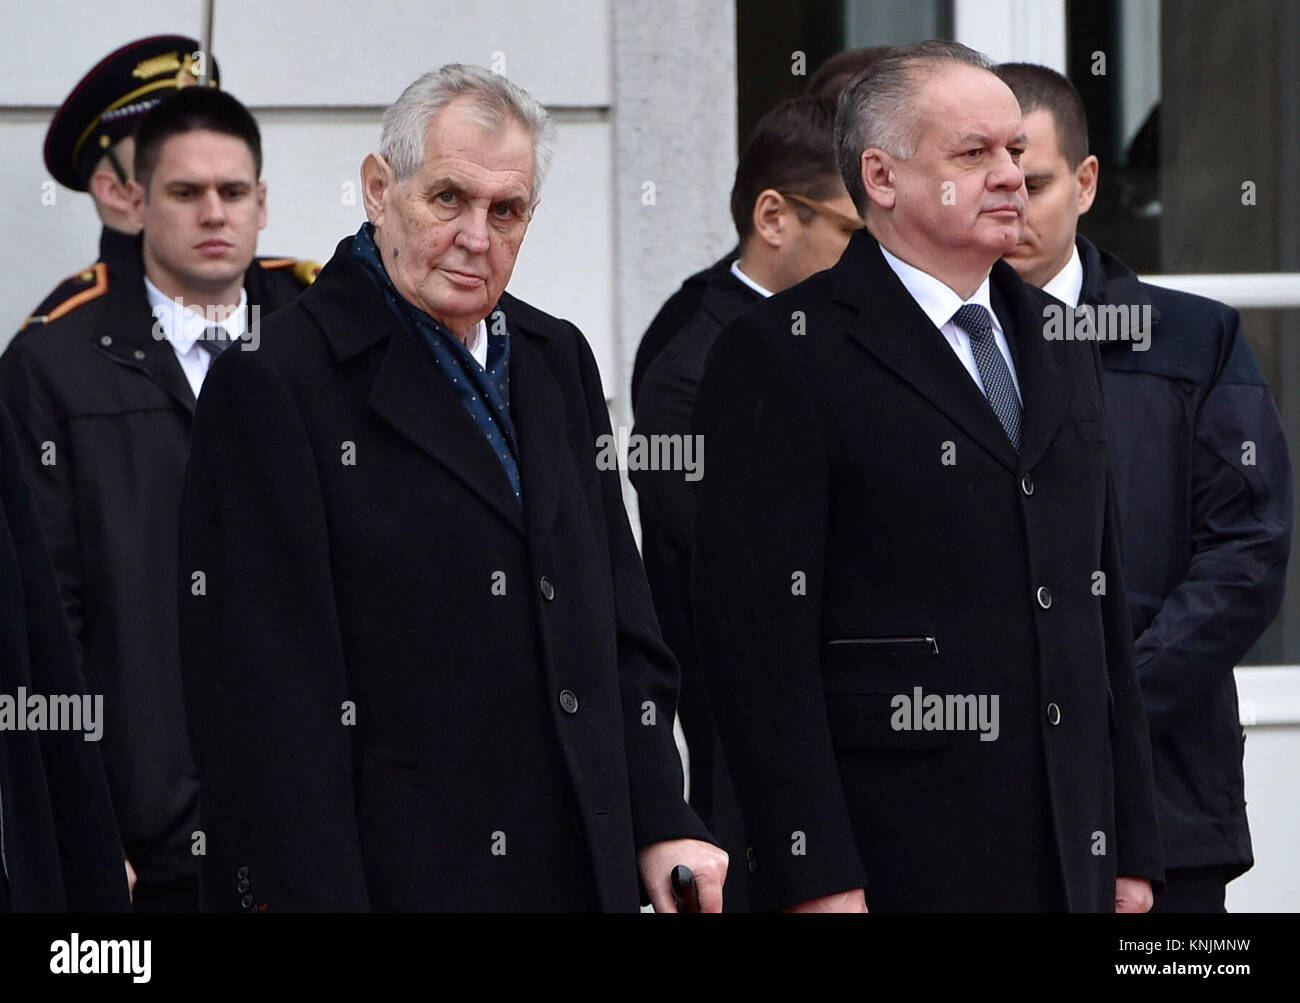 Bratislava, Slovakia. 12th Dec, 2017. Czech President Milos Zeman (left, front) visits Slovakia on December 12, 2017. This is Zeman's last abroad trip in this election period. On the photo is seen Zeman with his Slovak counterpart Andrej Kiska (right, front) in Bratislava, Slovakia. Credit: Vaclav Salek/CTK Photo/Alamy Live News Stock Photo